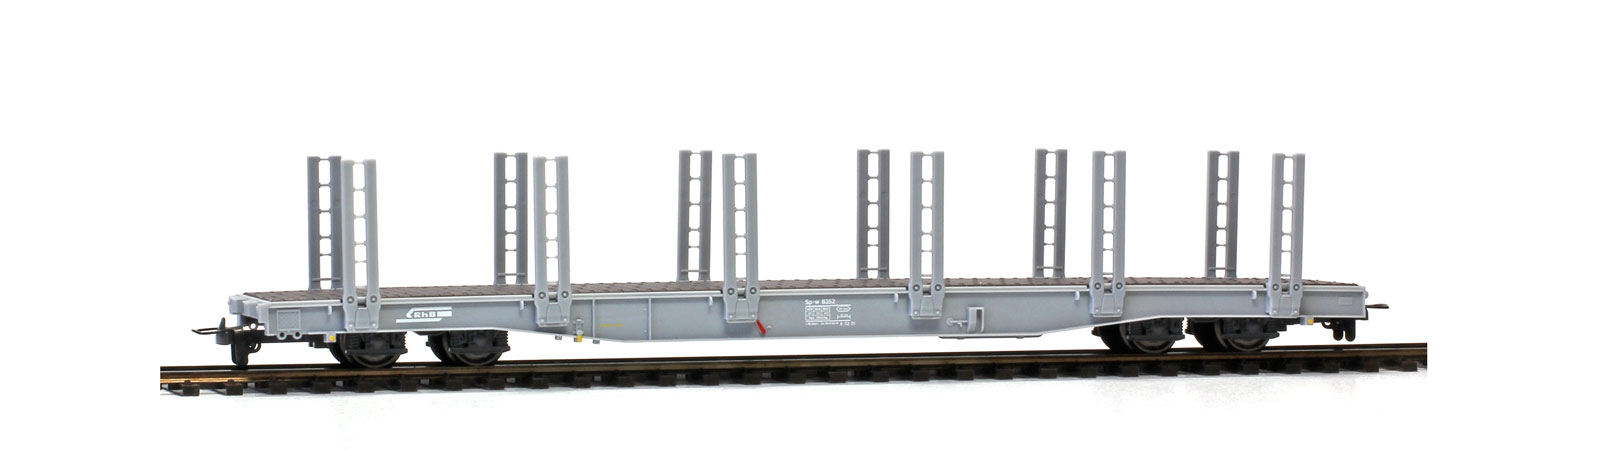 Bemo 2281 112 RhB Sp-w 8357 stake car with double stake unloaded